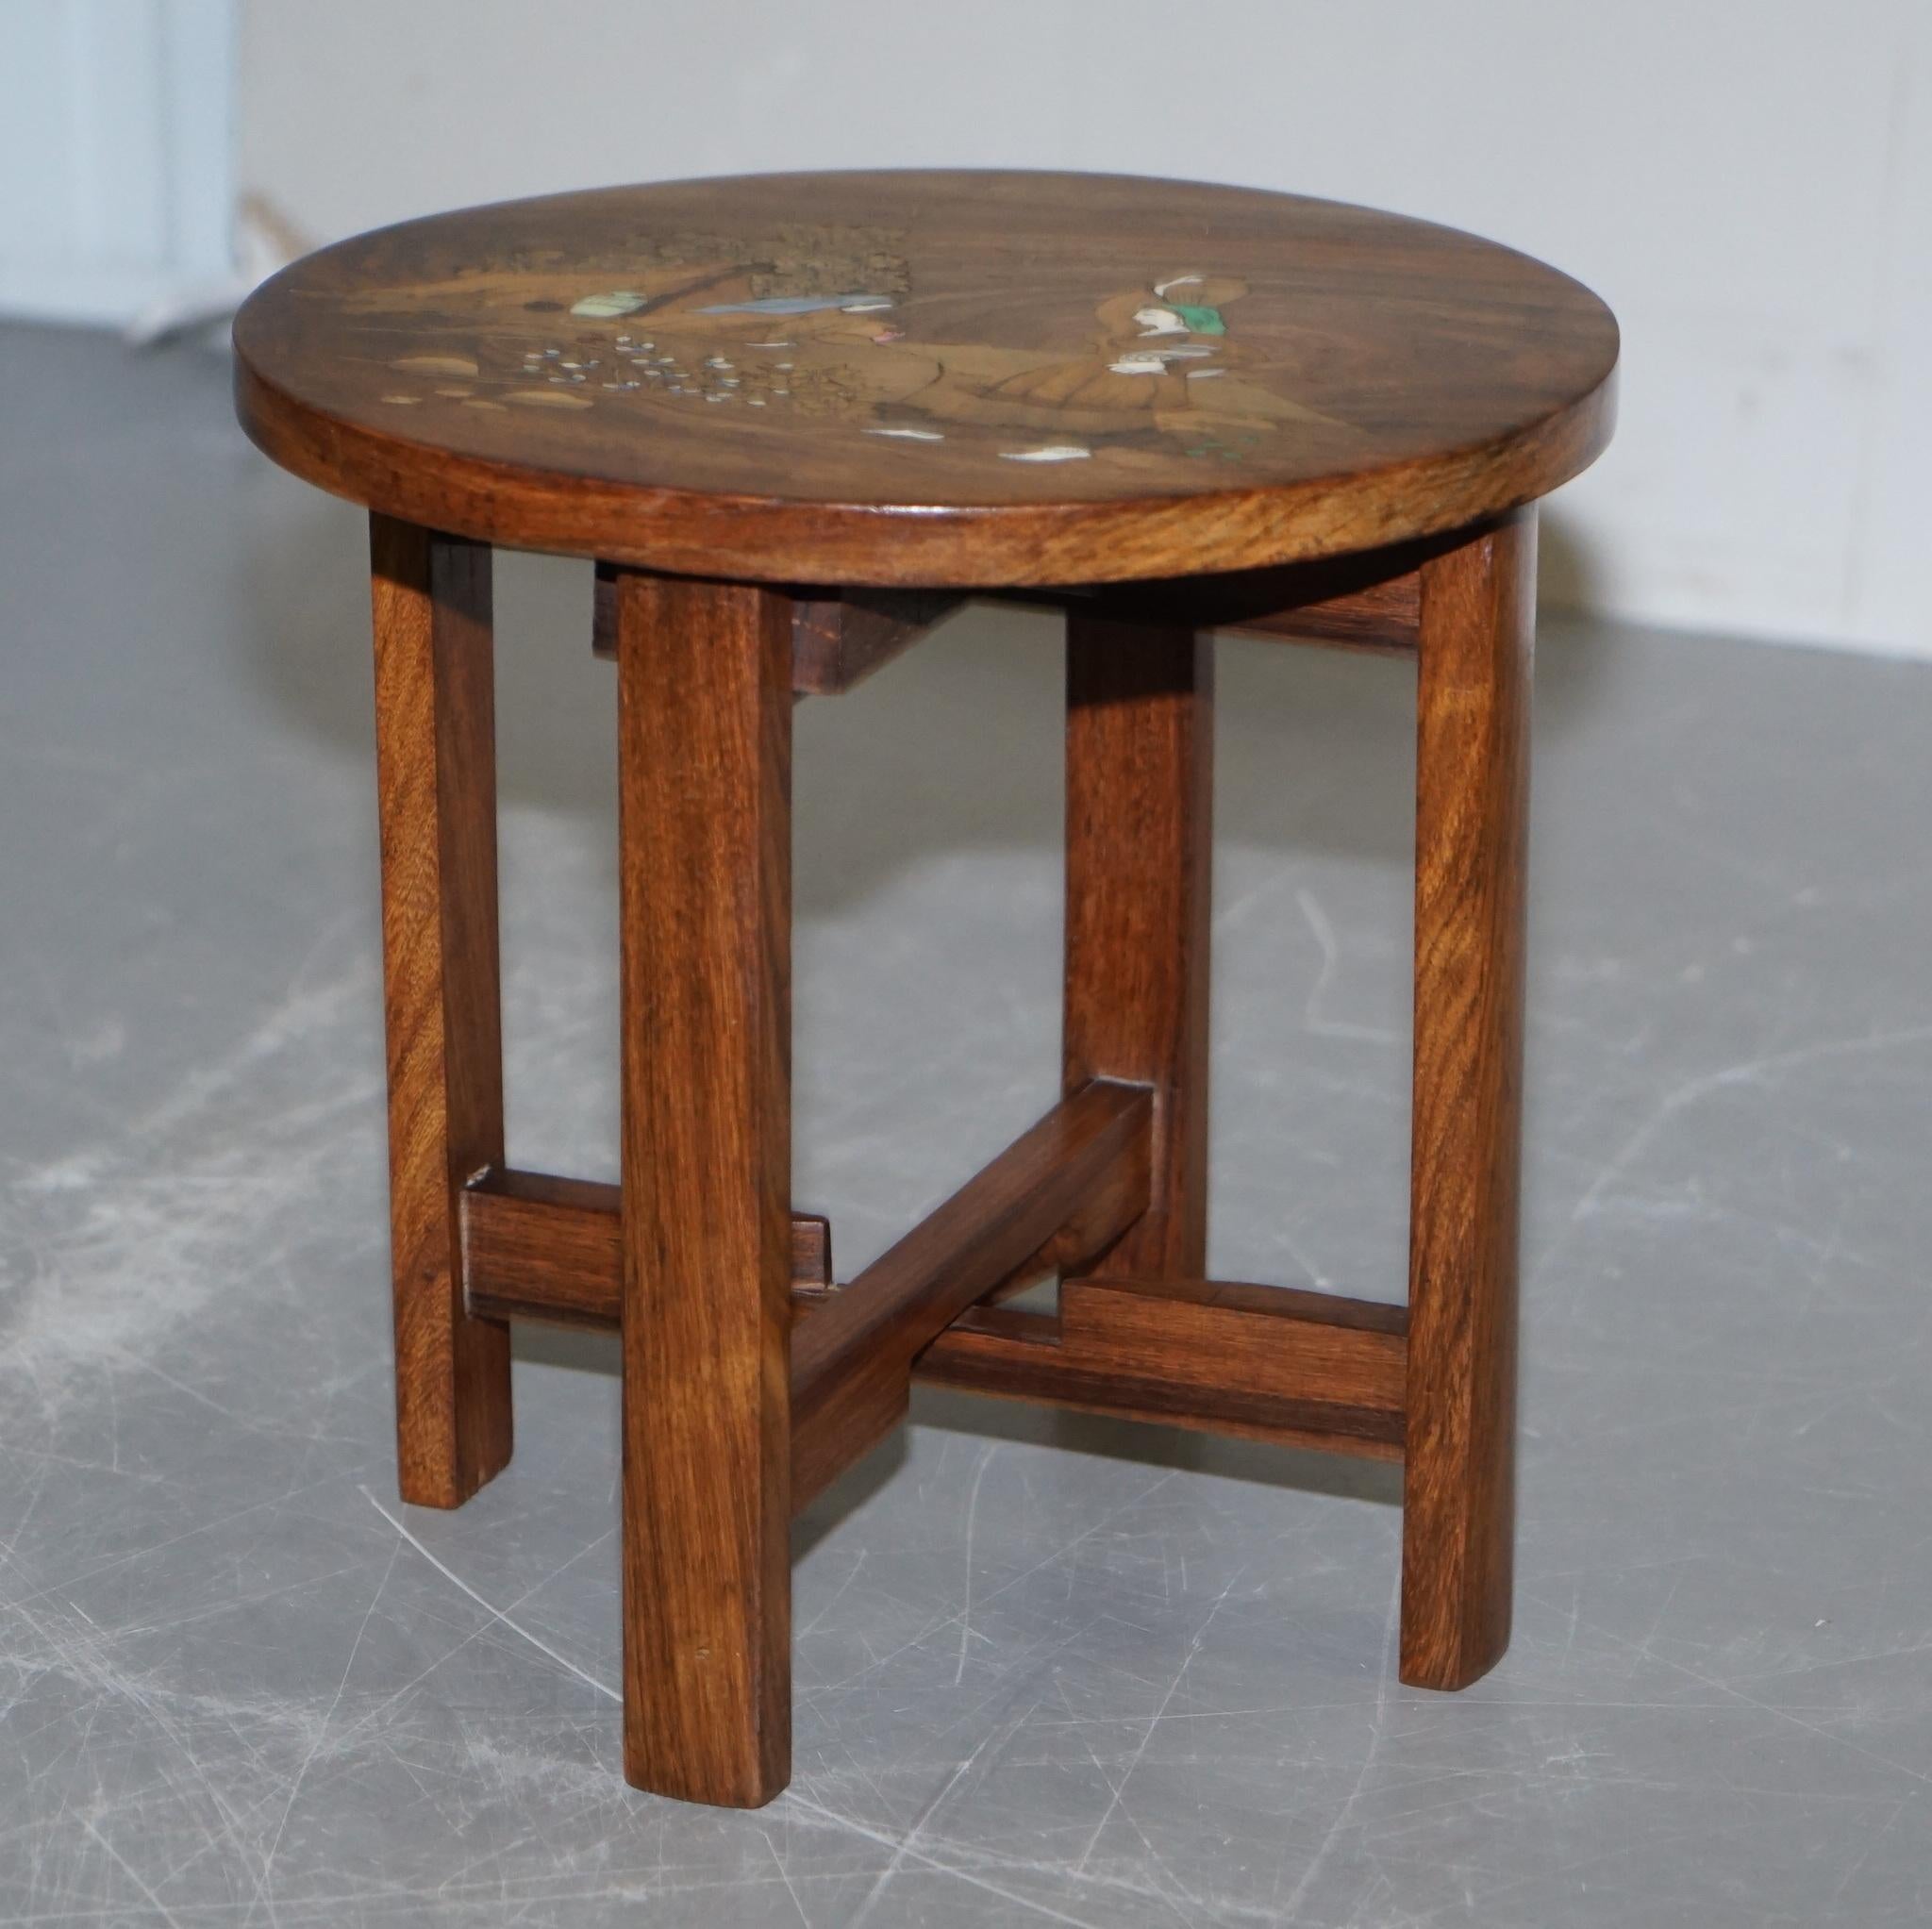 Hand-Crafted Antique Japanese Shibayama Inlaid Rural Colelcting Water Jug Hardwood Side Table For Sale